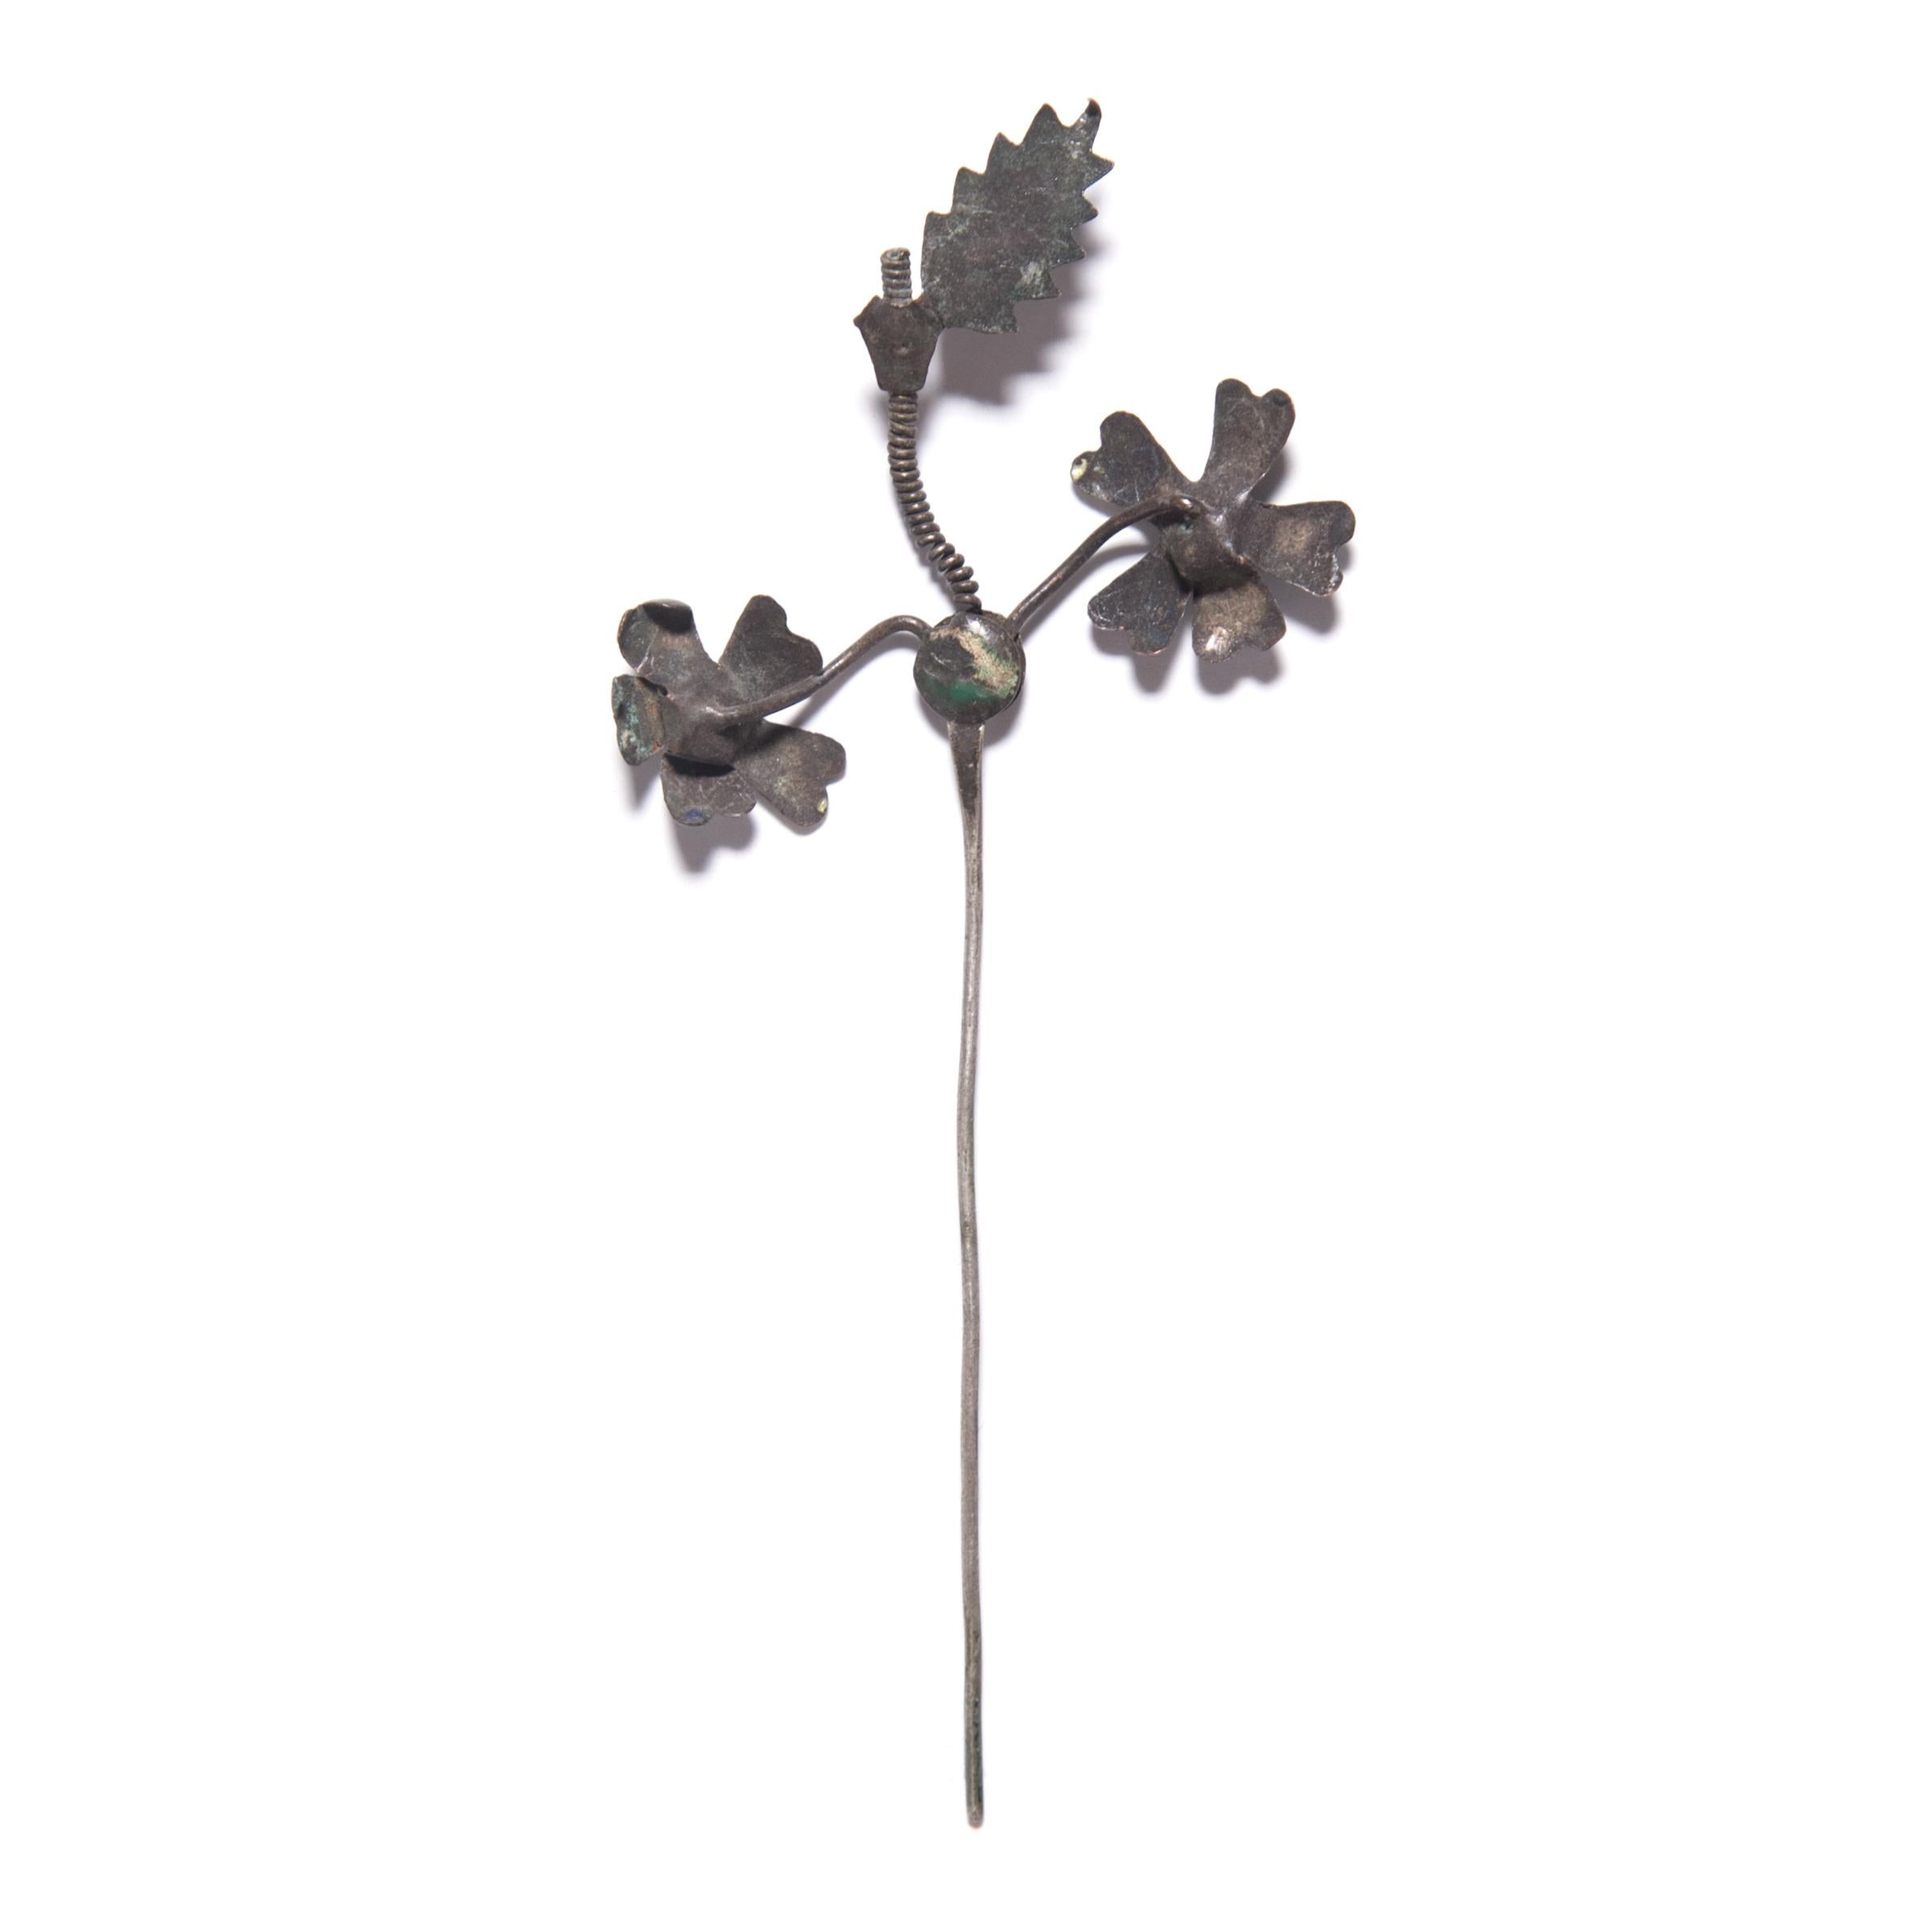 Qing Chinese Enameled Floral Hairpin, C. 1900